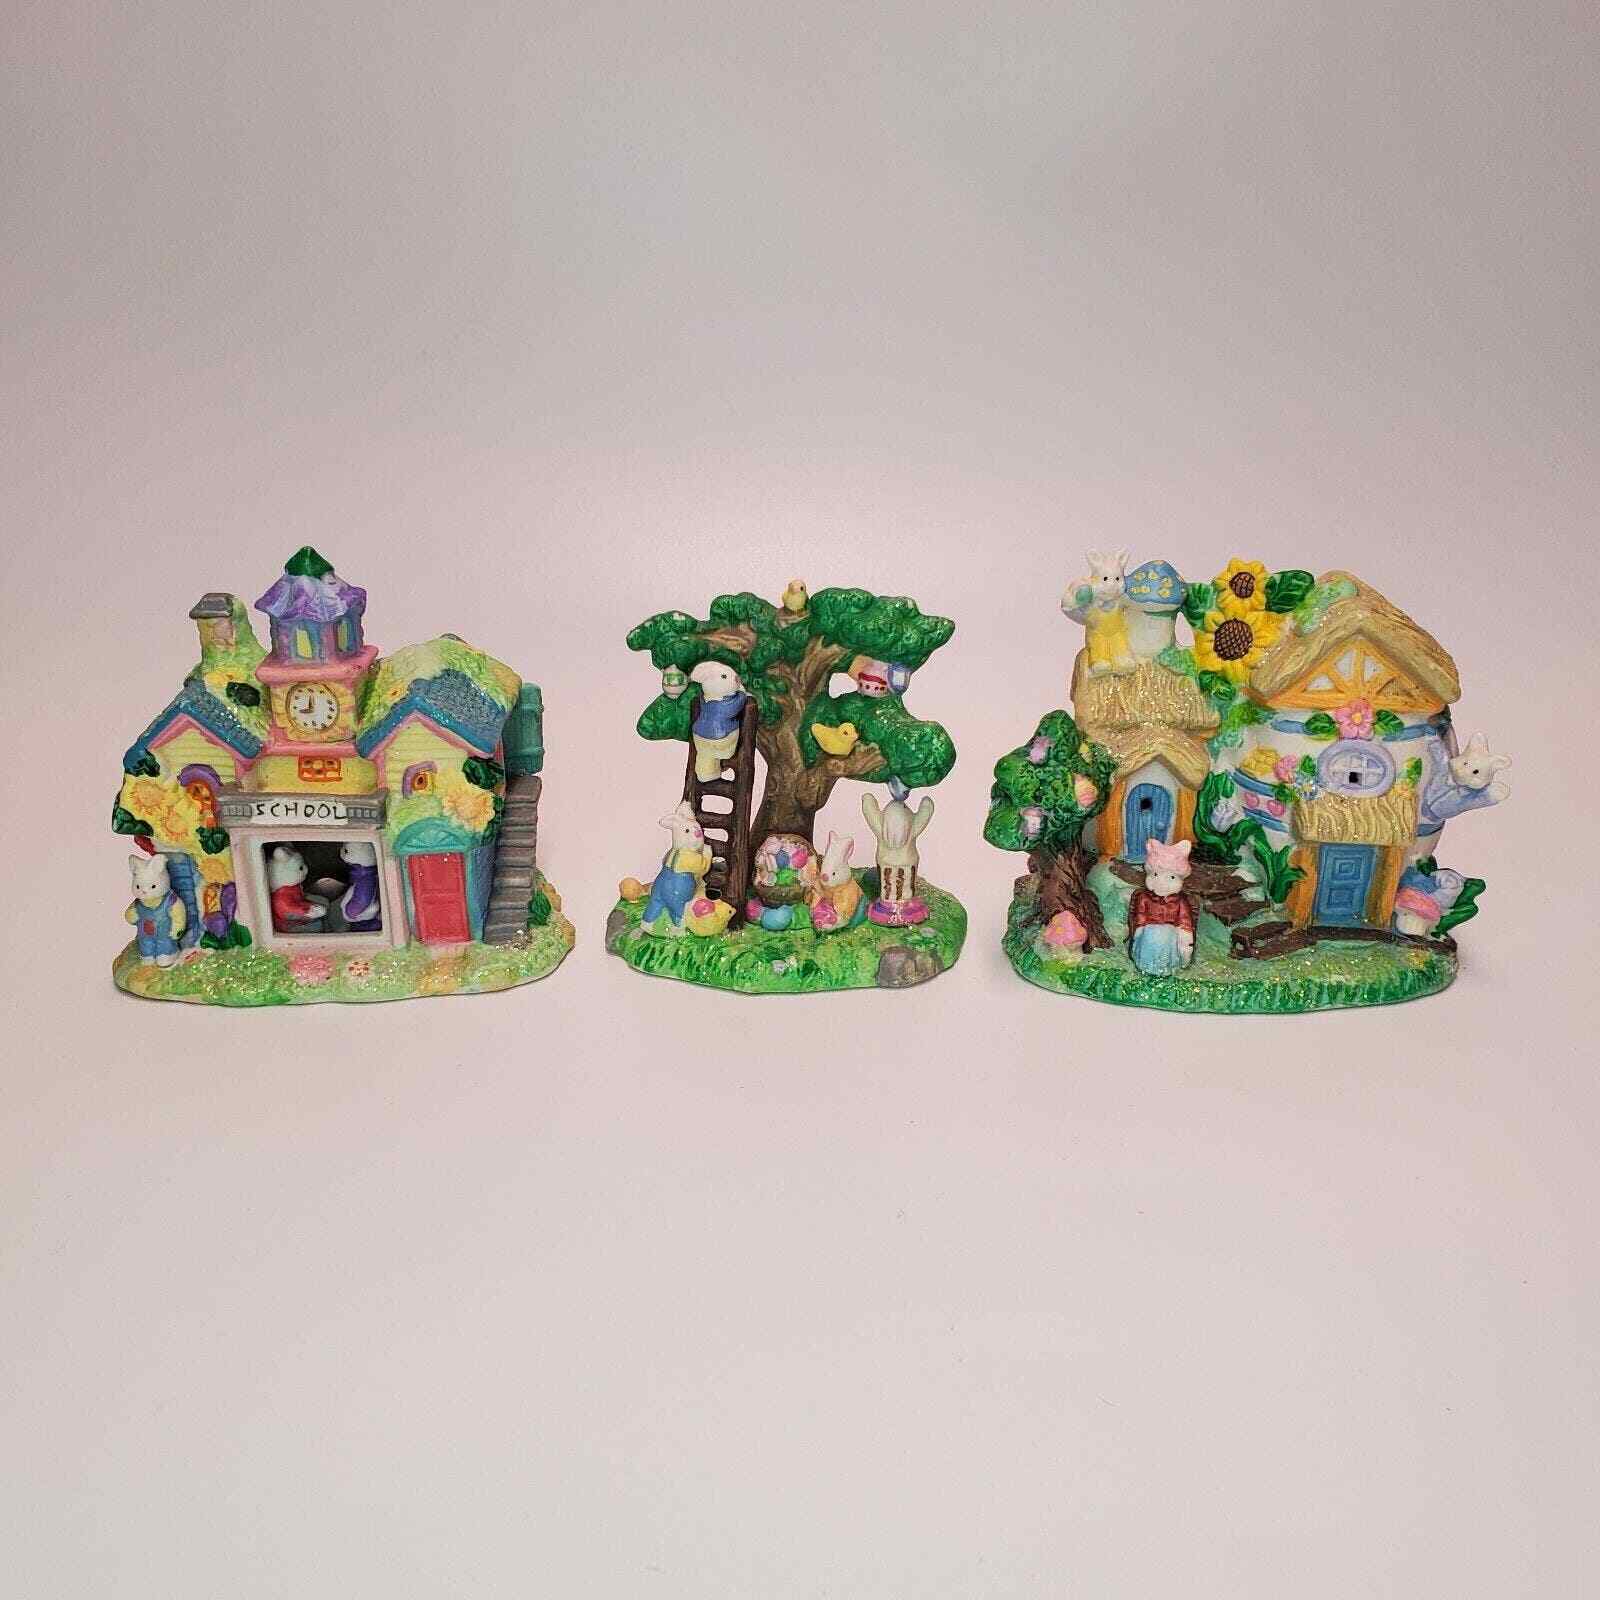 2003 Hoppy Hollow 3 pc. Lot of Easter Village Houses, School, Tree House, House